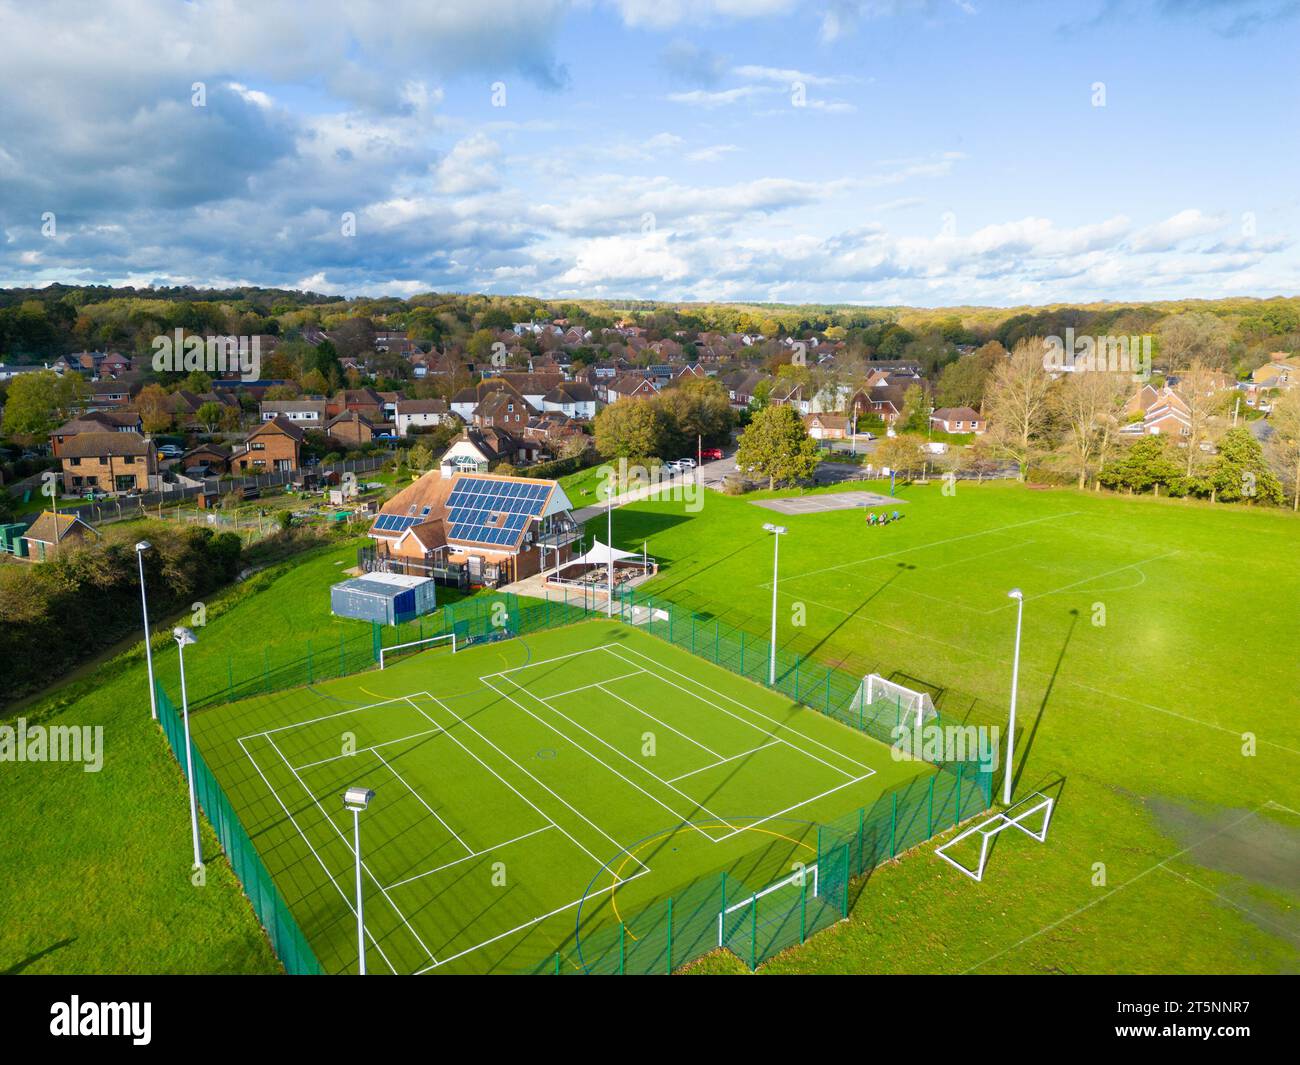 Aerial view of a sports complex with tennis courts and soccer fields in a suburban area on a sunny day, Hamstreet village, Ashford, Kent Stock Photo